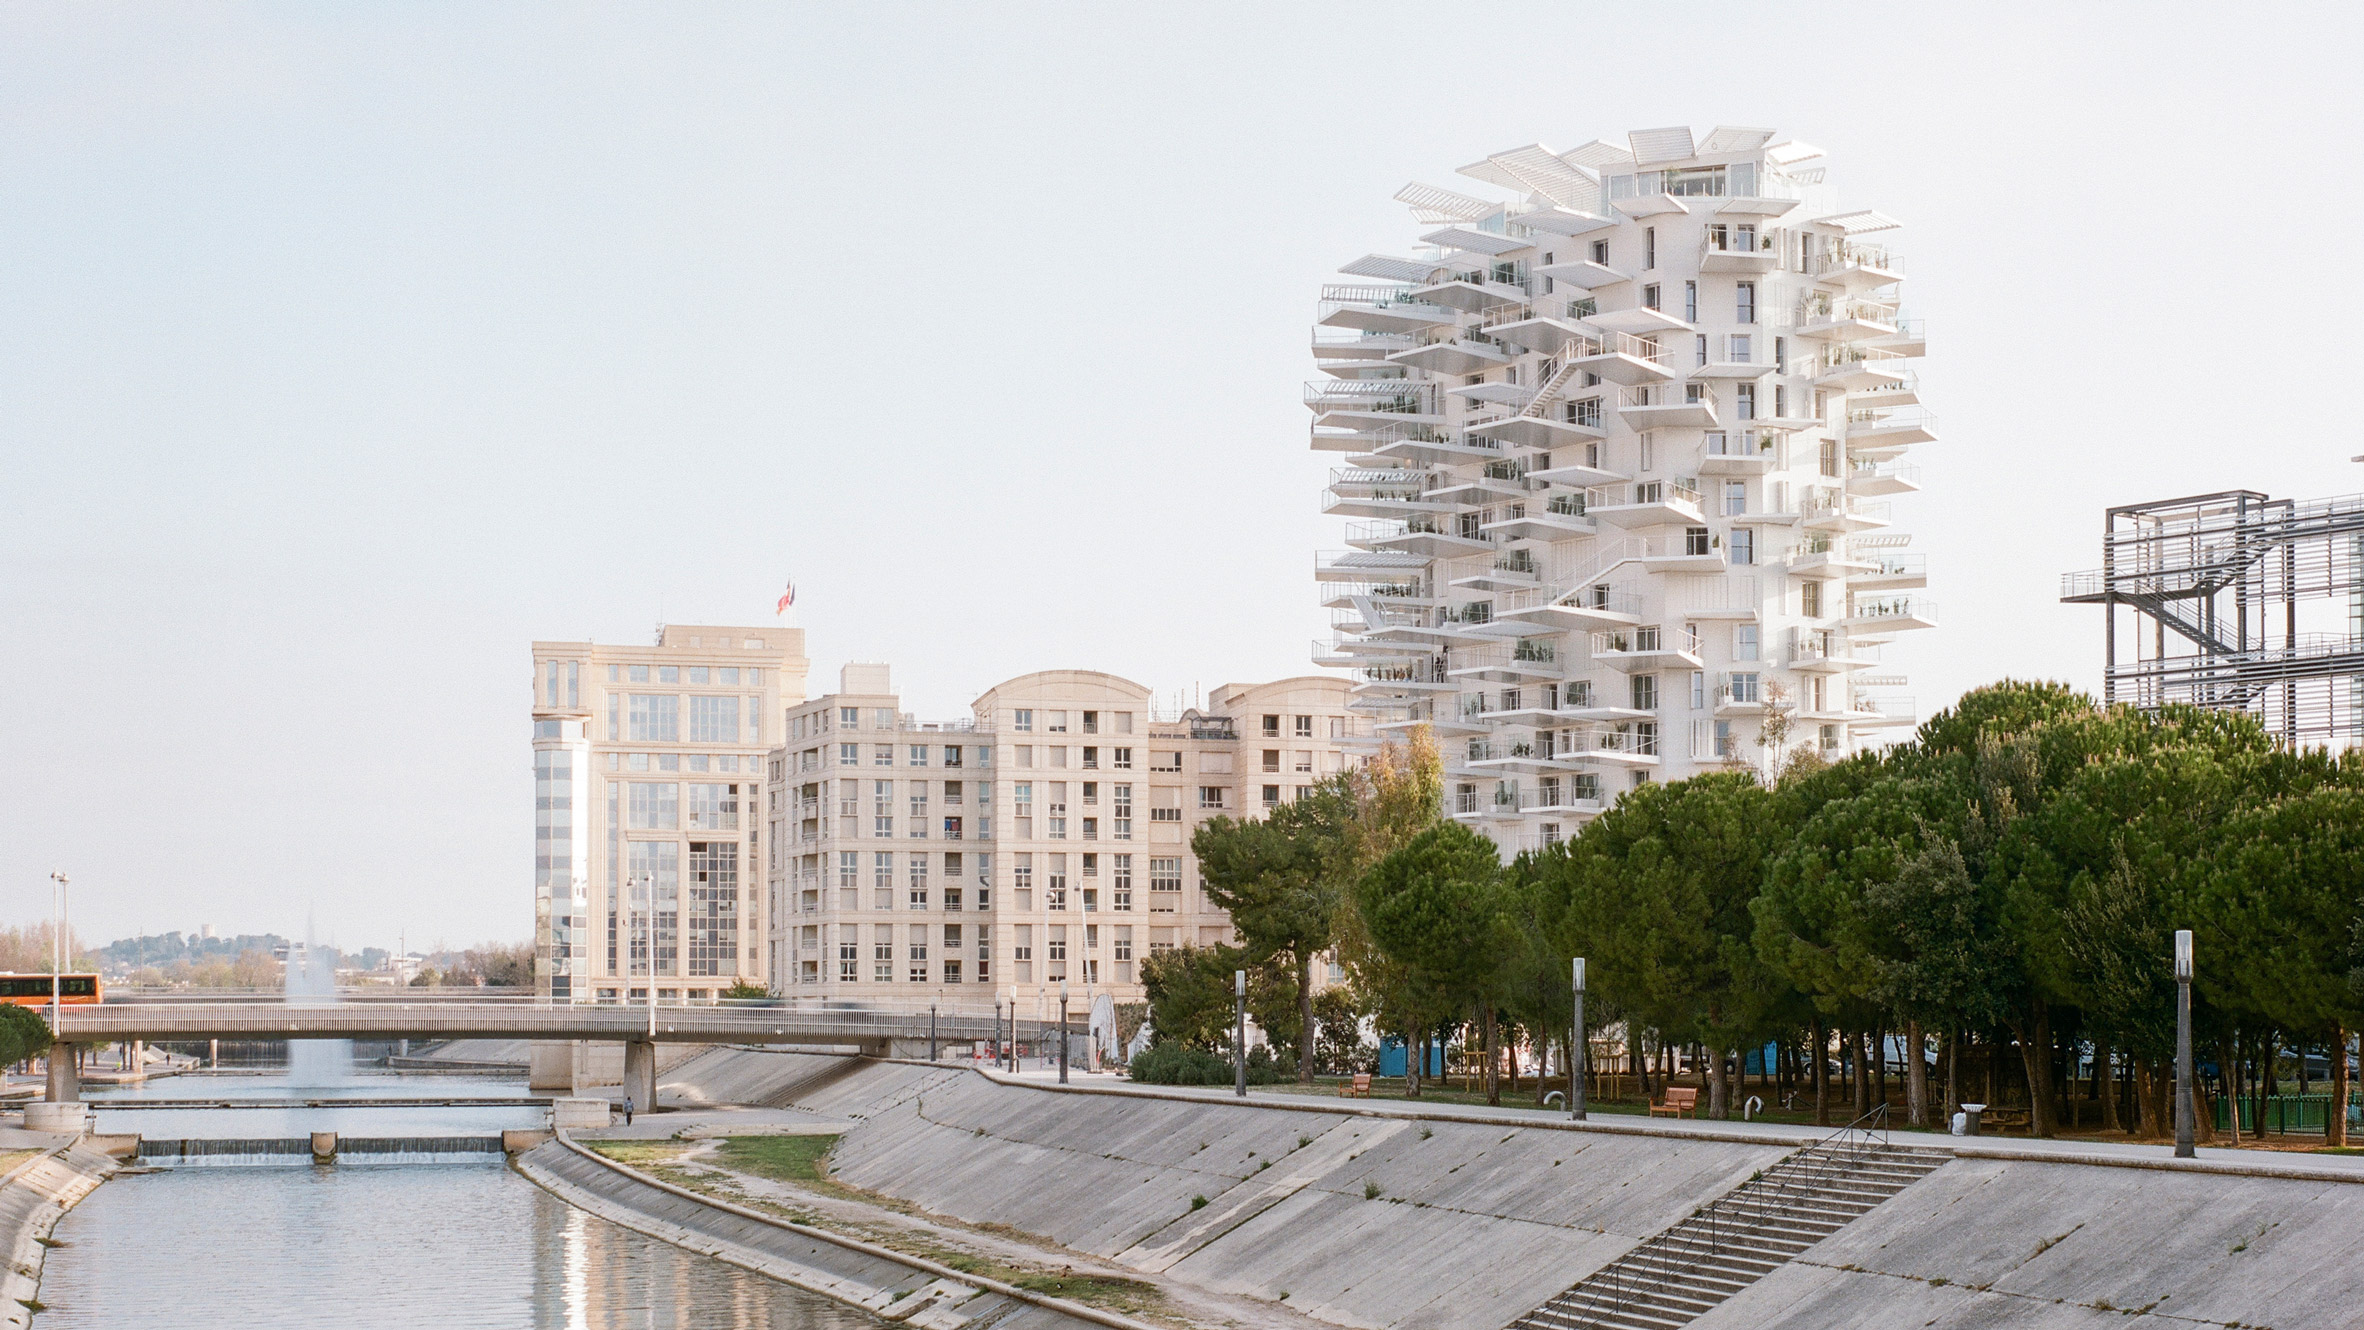 Balconies branch out from Sou Fujimoto's tree-like tower in Montpellier